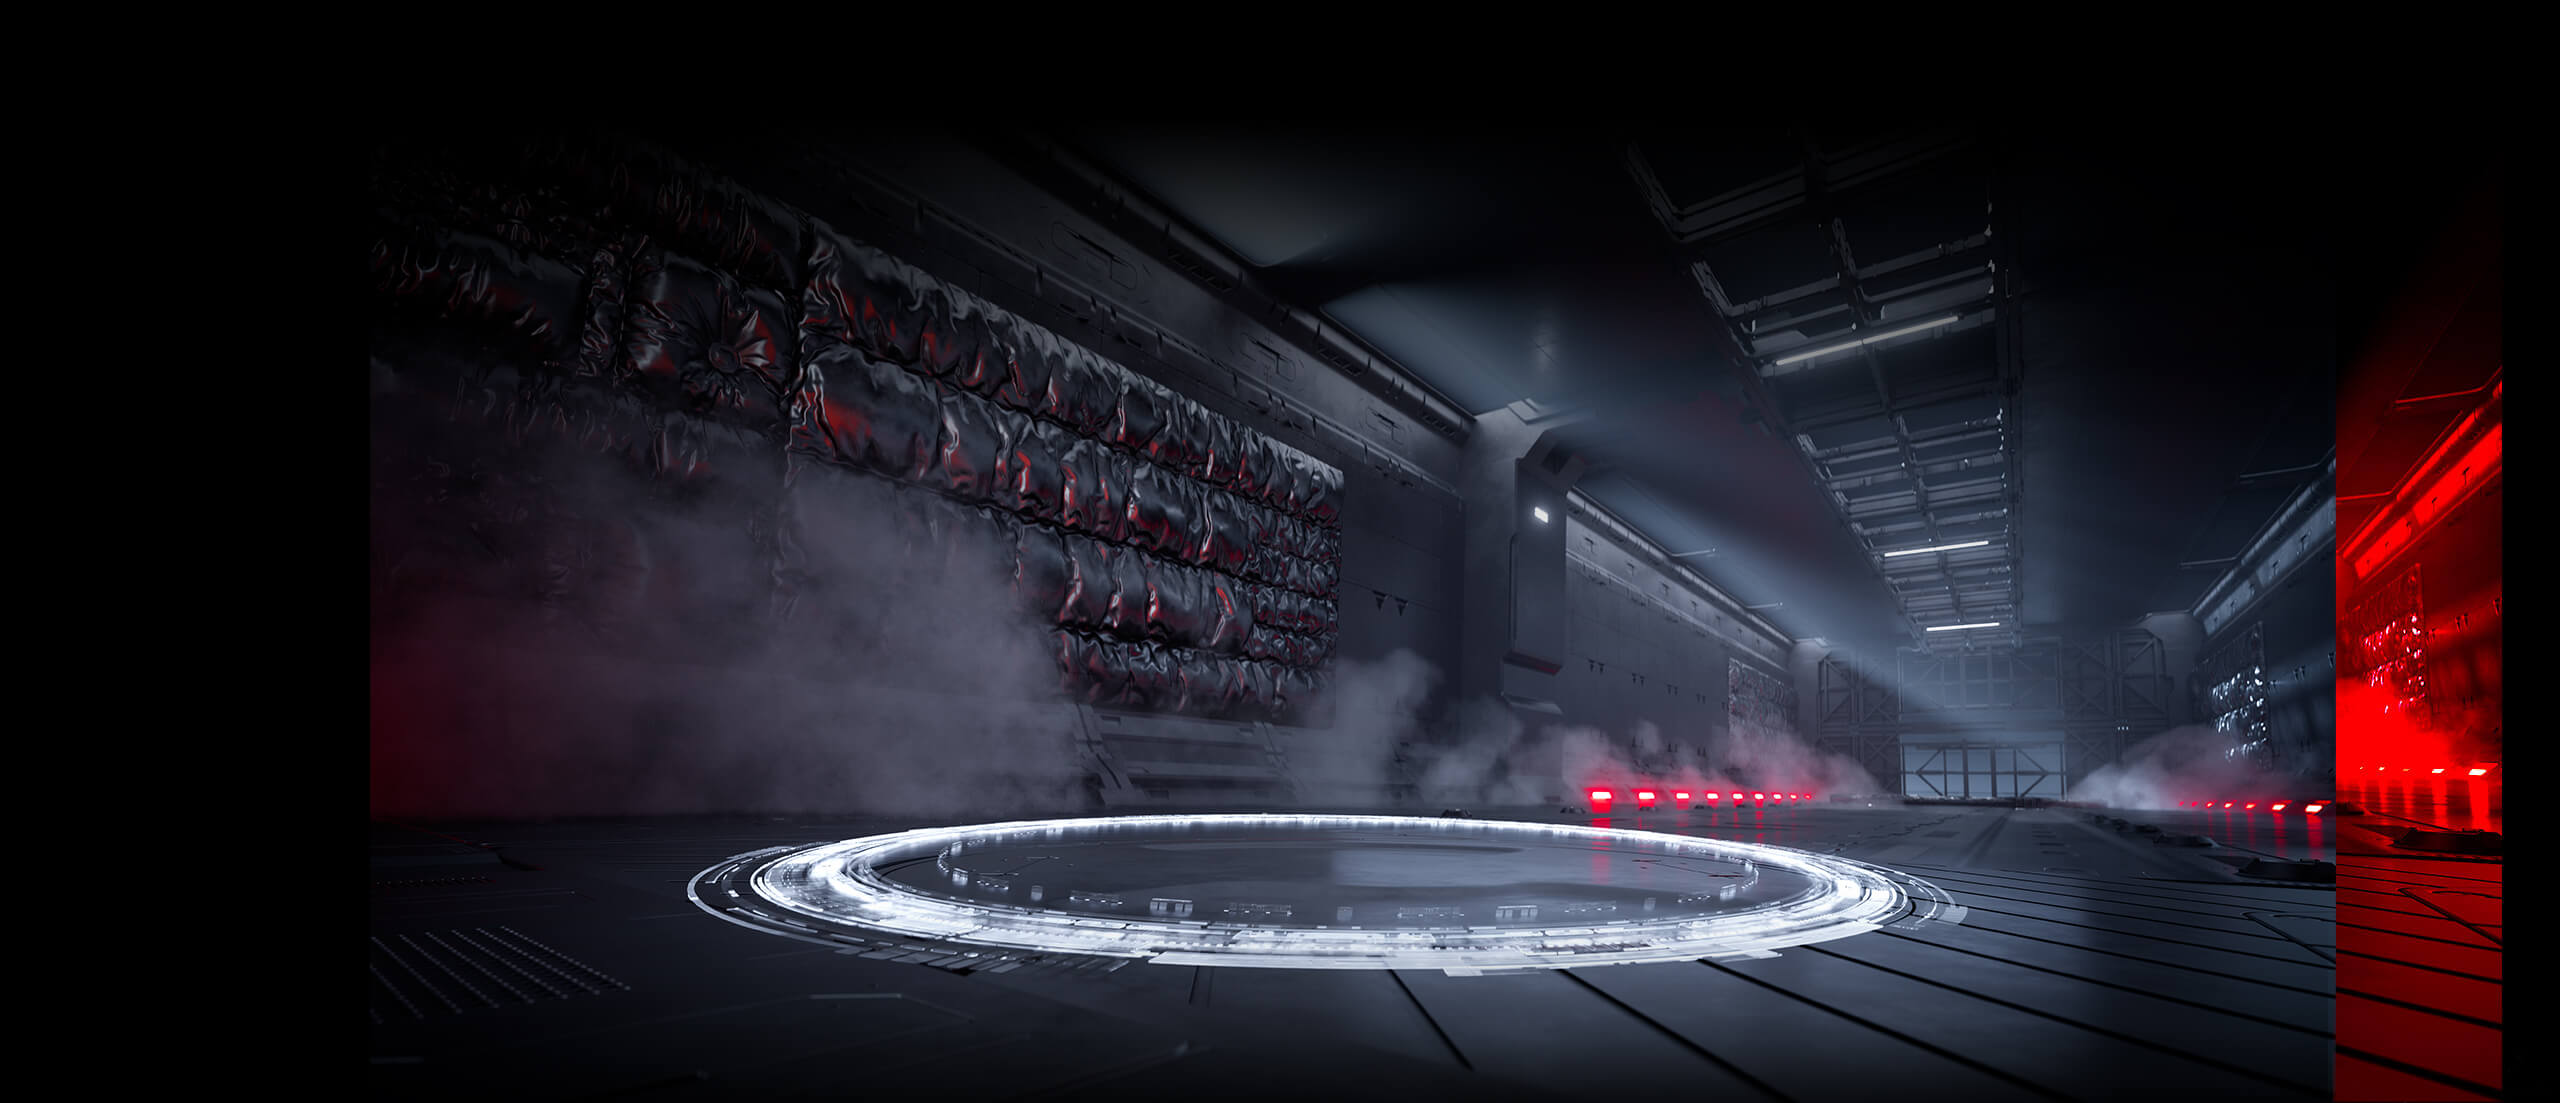 The ROG Chakram X is at the end of a long arena, hovering above a circle of light